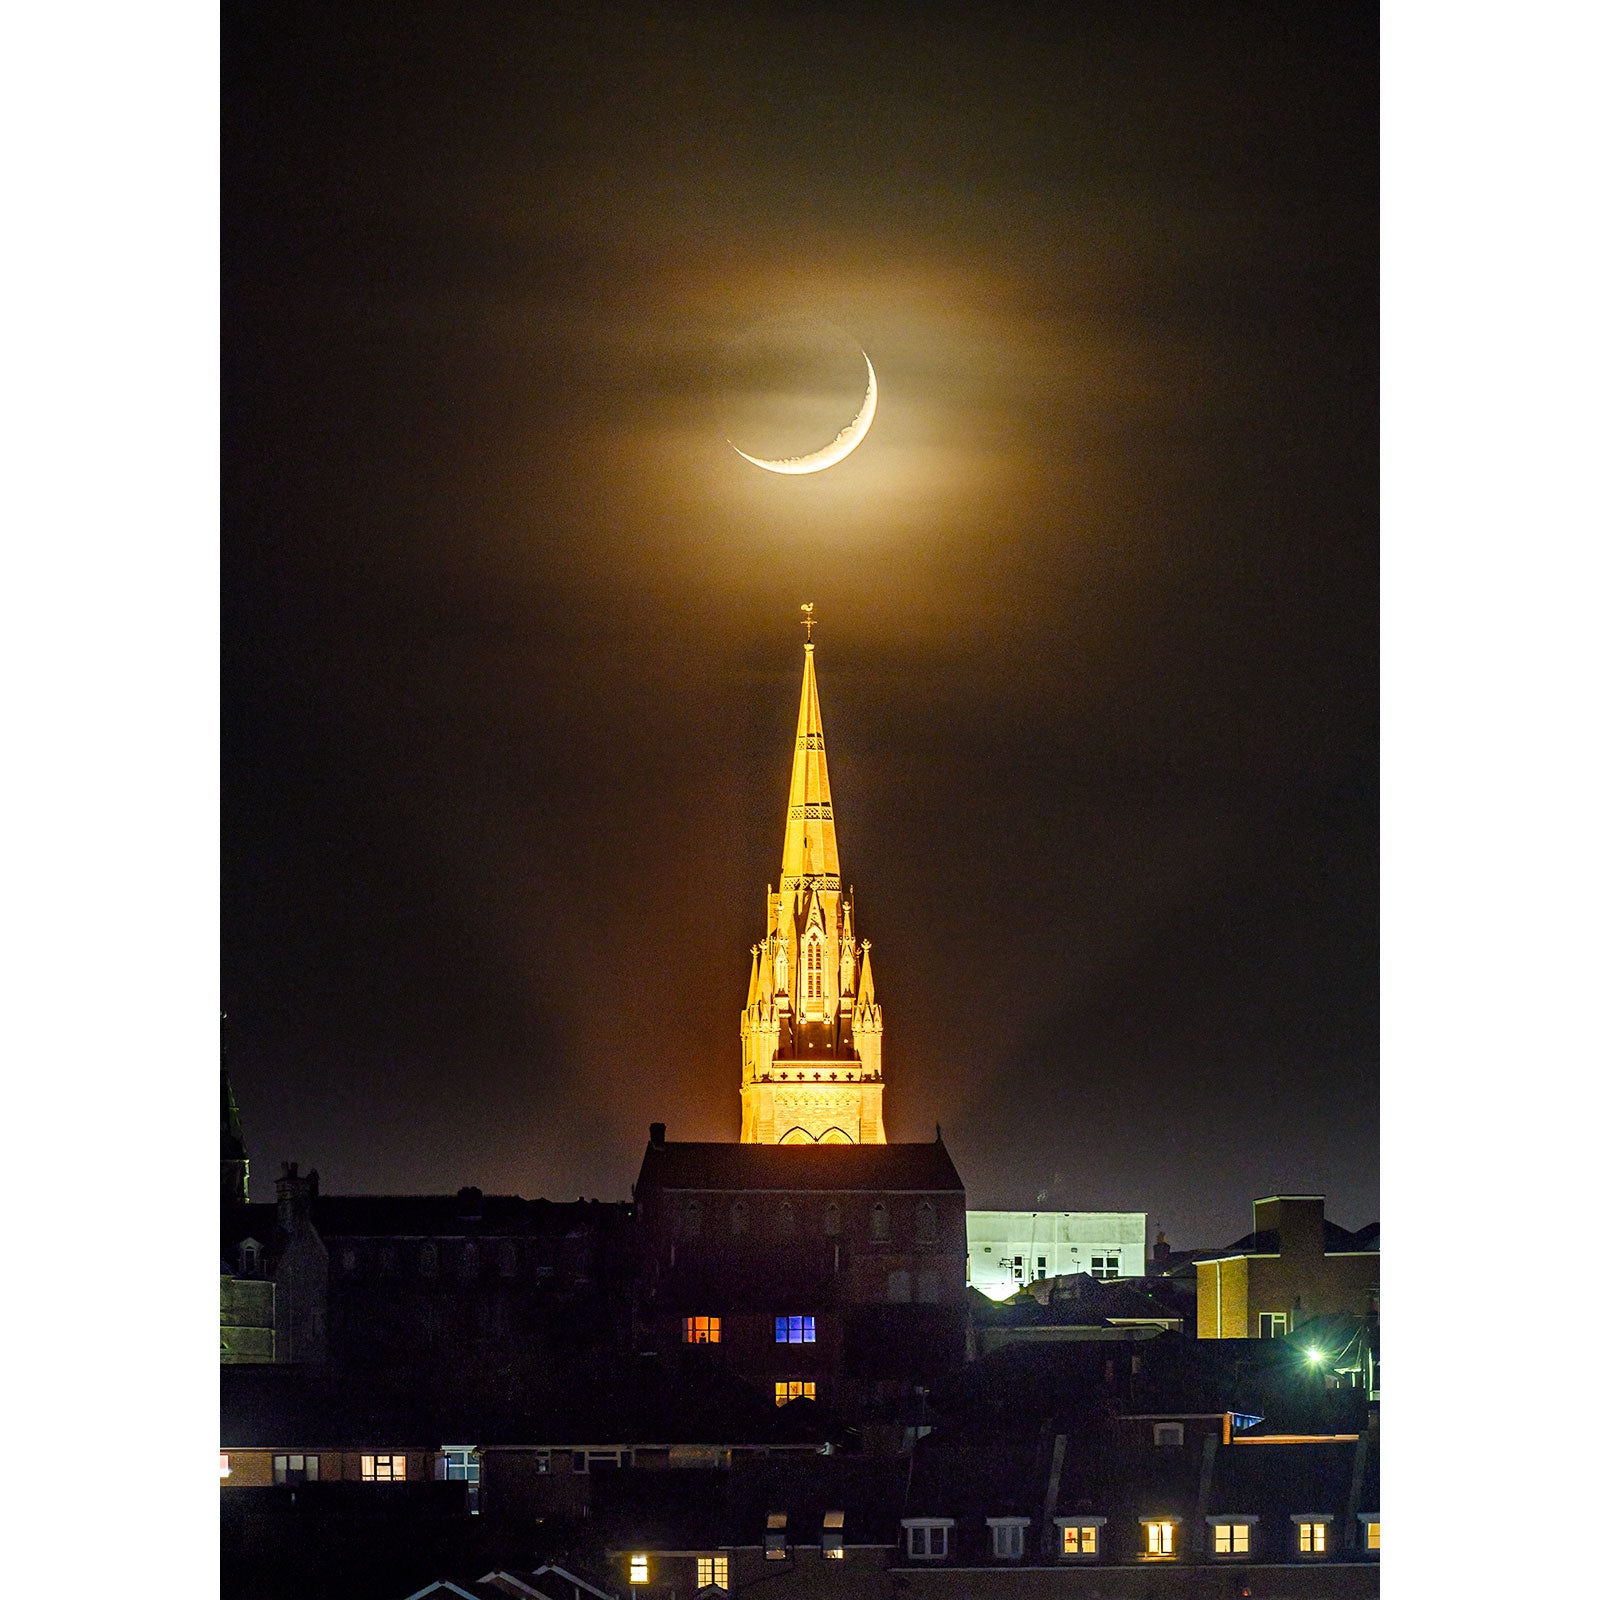 Crescent Moon over All Saints' Church, Ryde aligned above a lit church spire on the Isle of Wight during nighttime. (Available Light Photography)